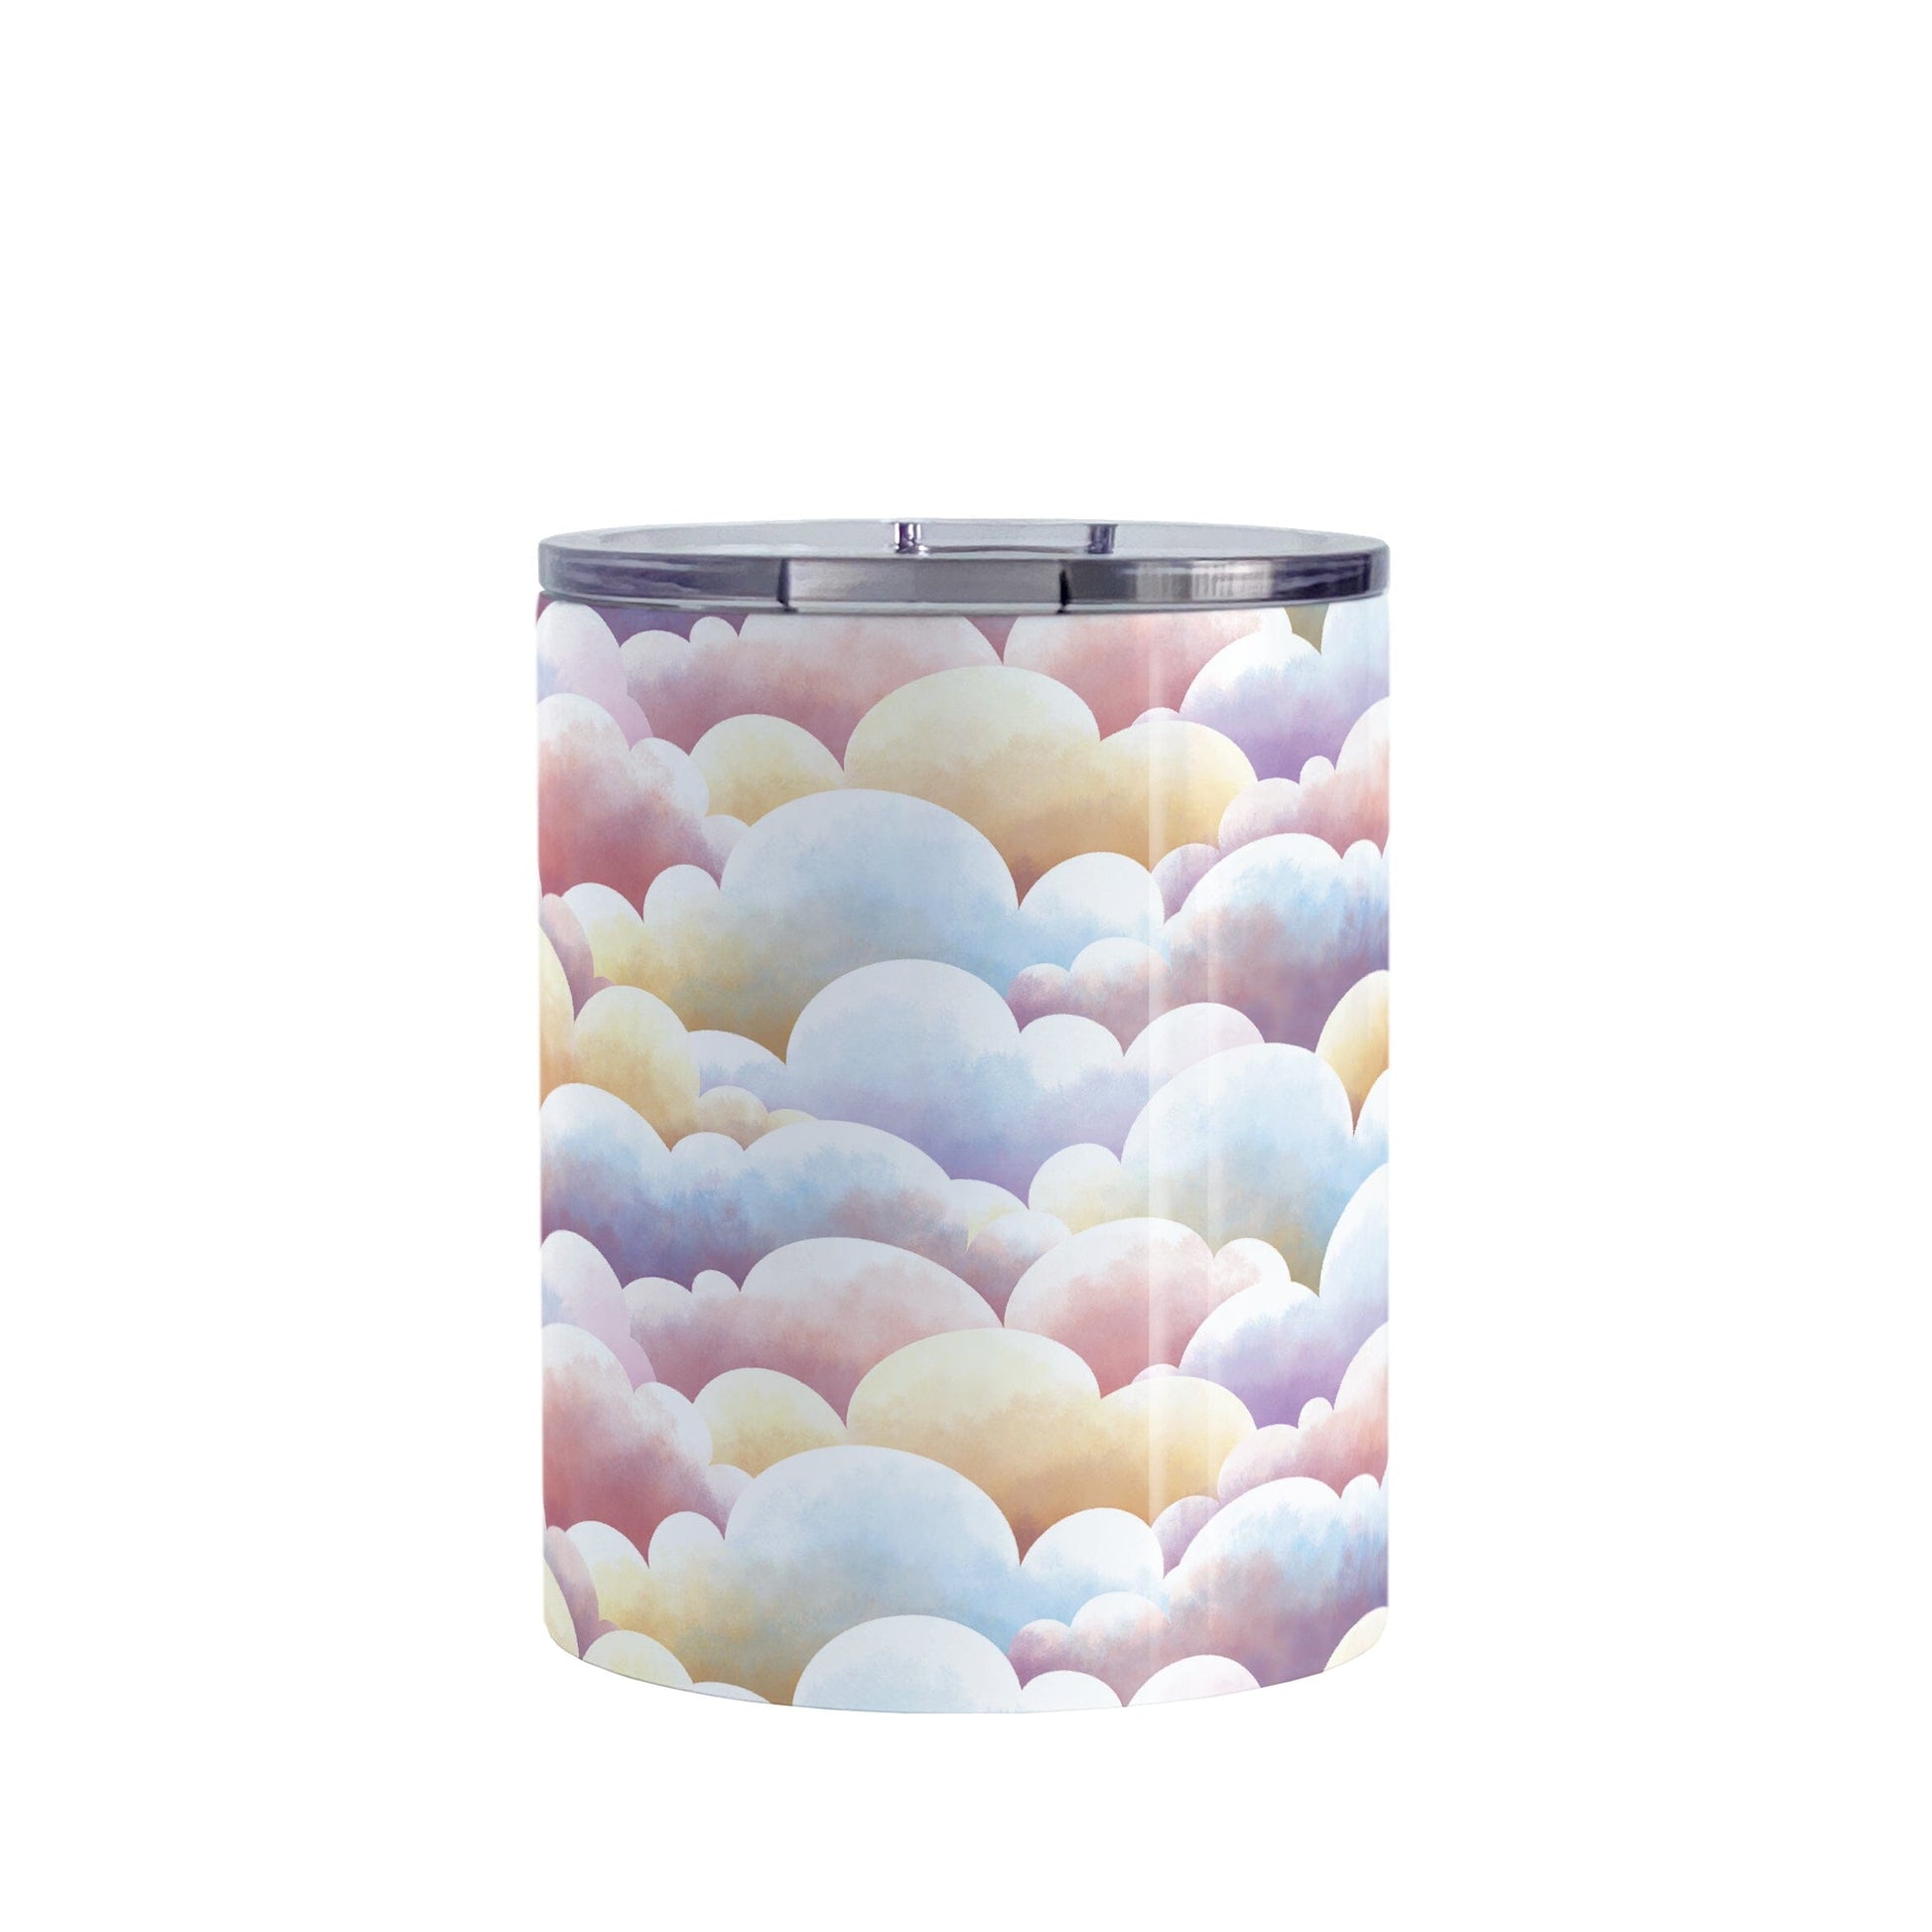 Colorful Clouds Tumbler Cup (10oz) at Amy's Coffee Mugs. A stainless steel tumbler cup designed with a blanket of whimsical and colorful clouds in a pattern that wraps around the cup.